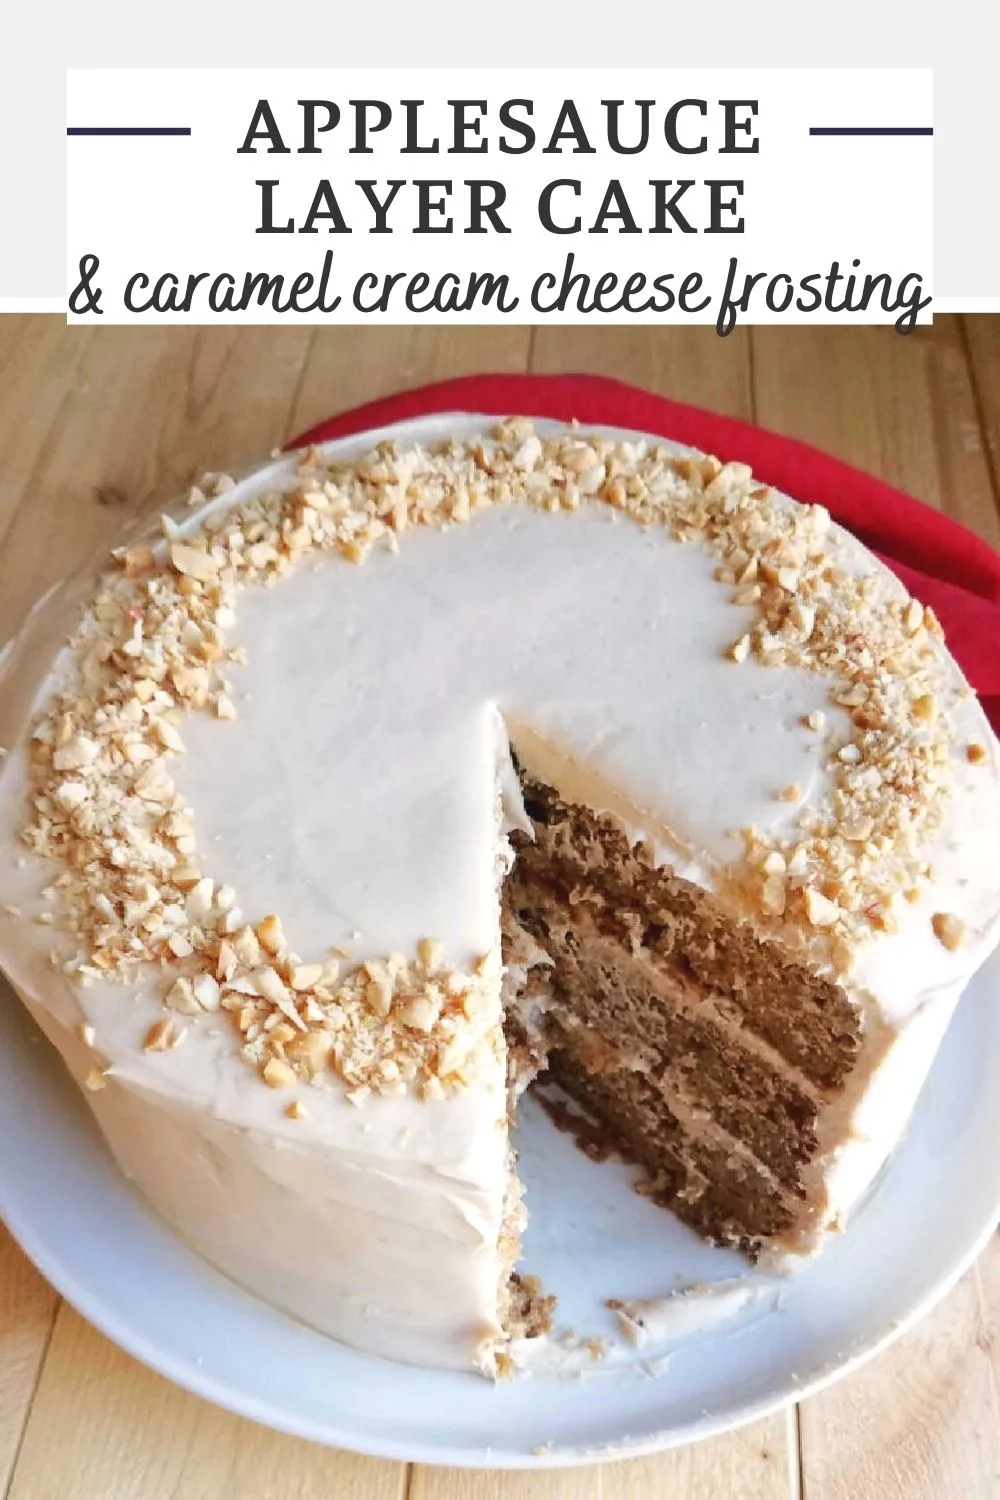 Slightly spiced and super moist applesauce layer cake goes perfectly with a soft and luscious caramel cream cheese frosting.  This cake is stunning and is perfect for fall gatherings.